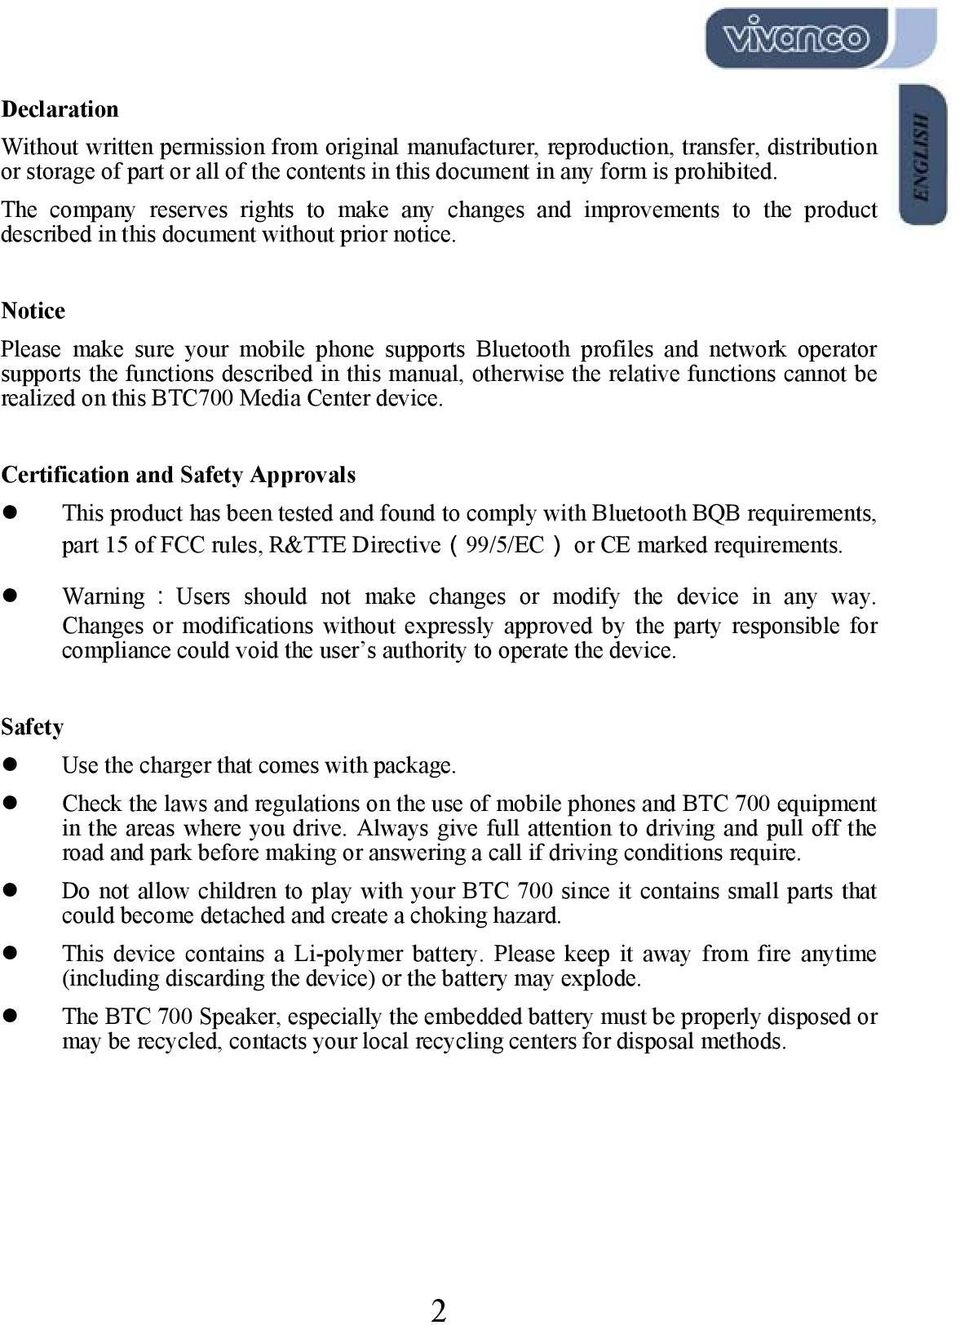 Notice Please make sure your mobile phone supports Bluetooth profiles and network operator supports the functions described in this manual, otherwise the relative functions cannot be realized on this